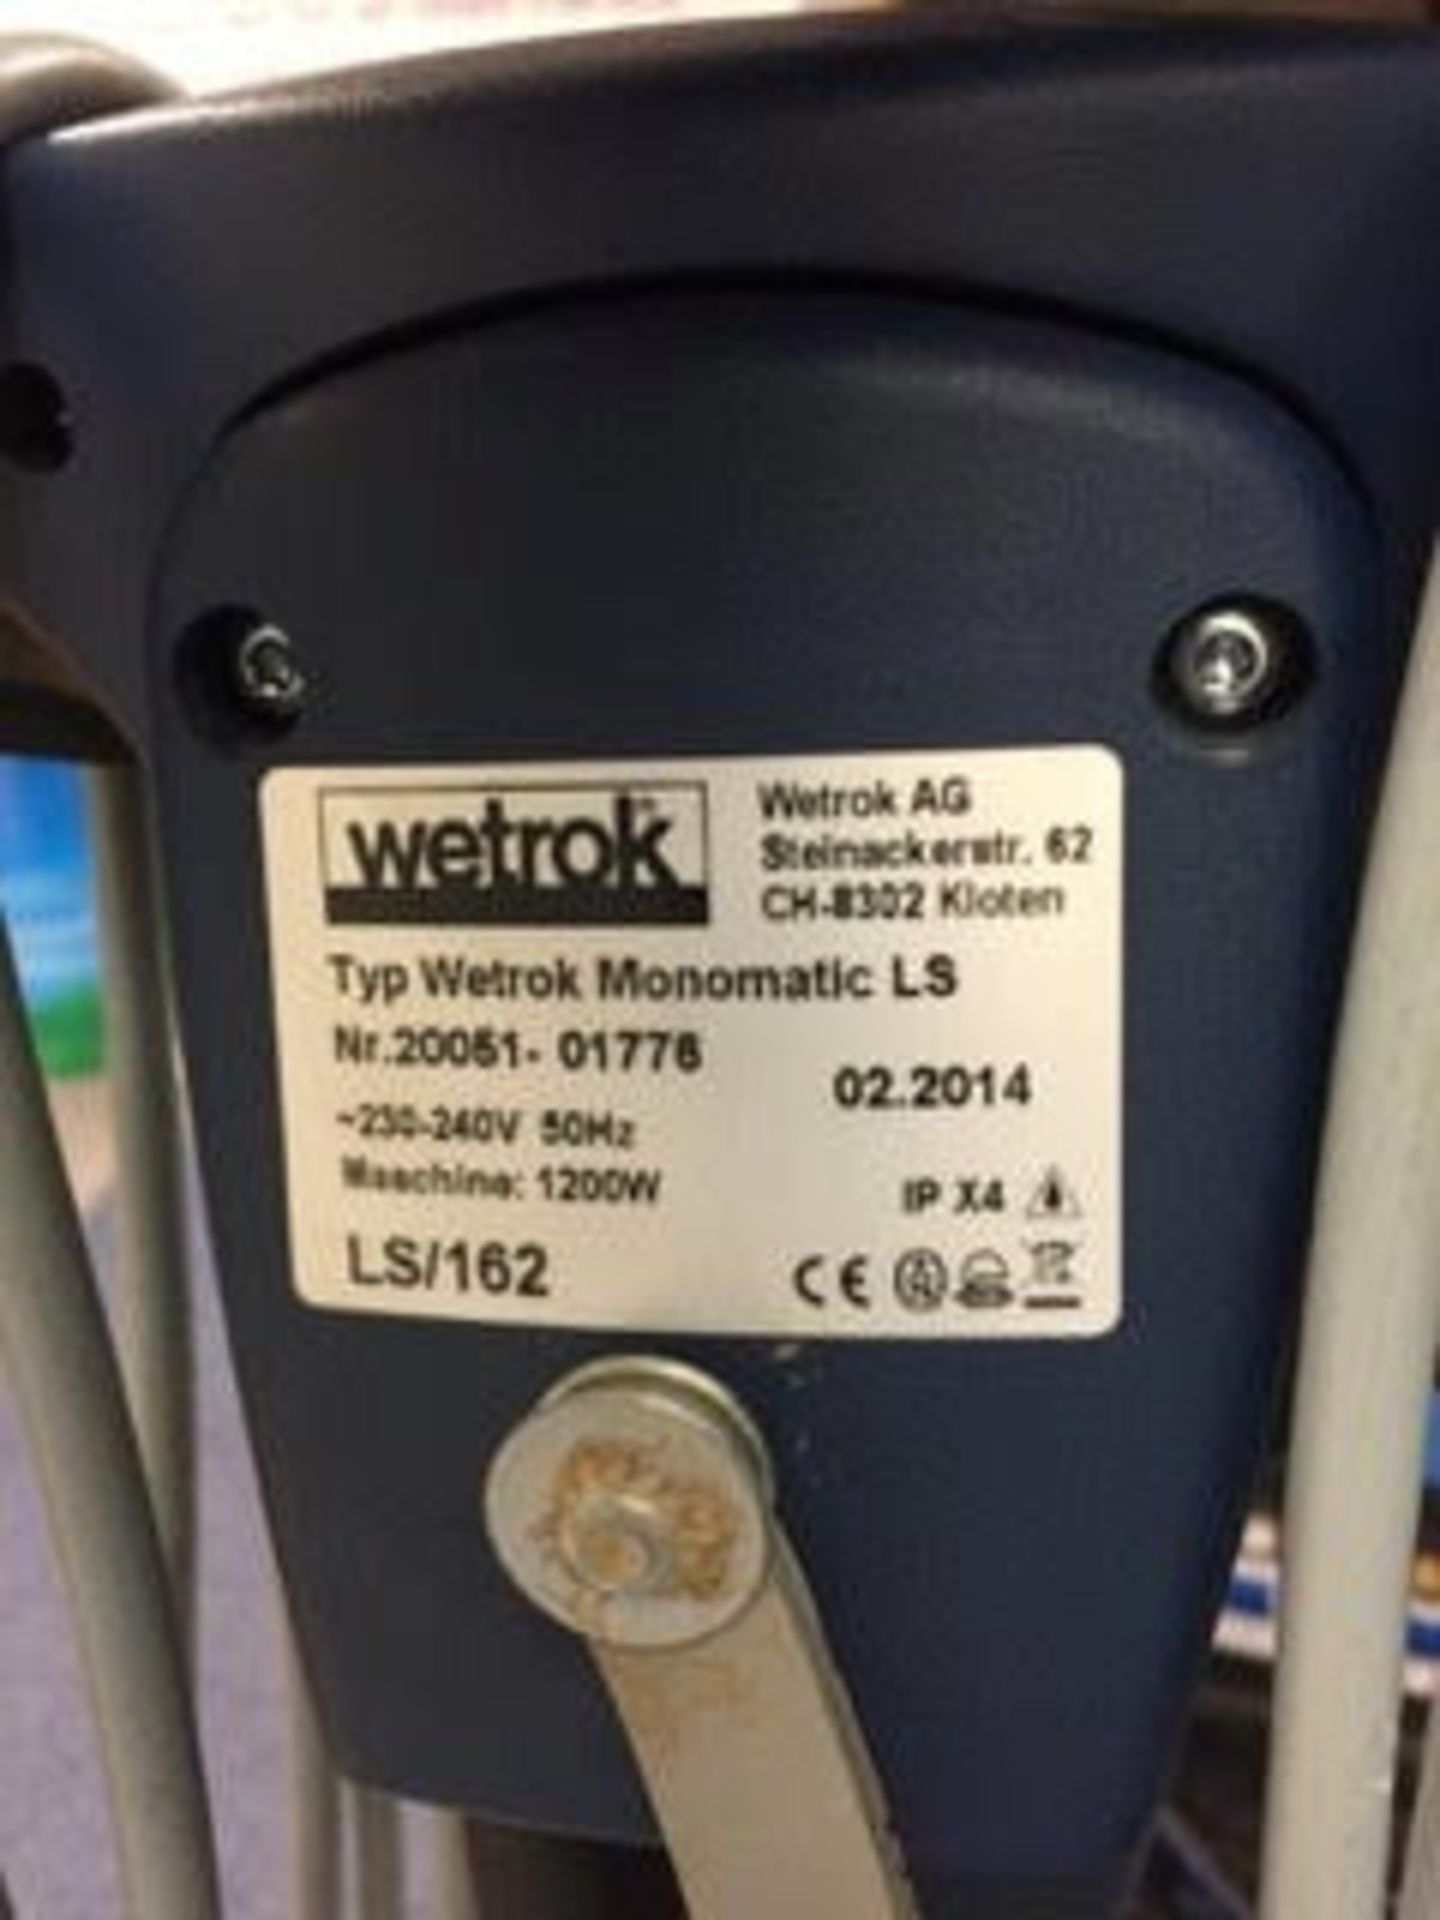 1 x WETROK Monomatic LS Commercial Cleaning Machine - Suitable For Professional Cleaning - Image 3 of 3